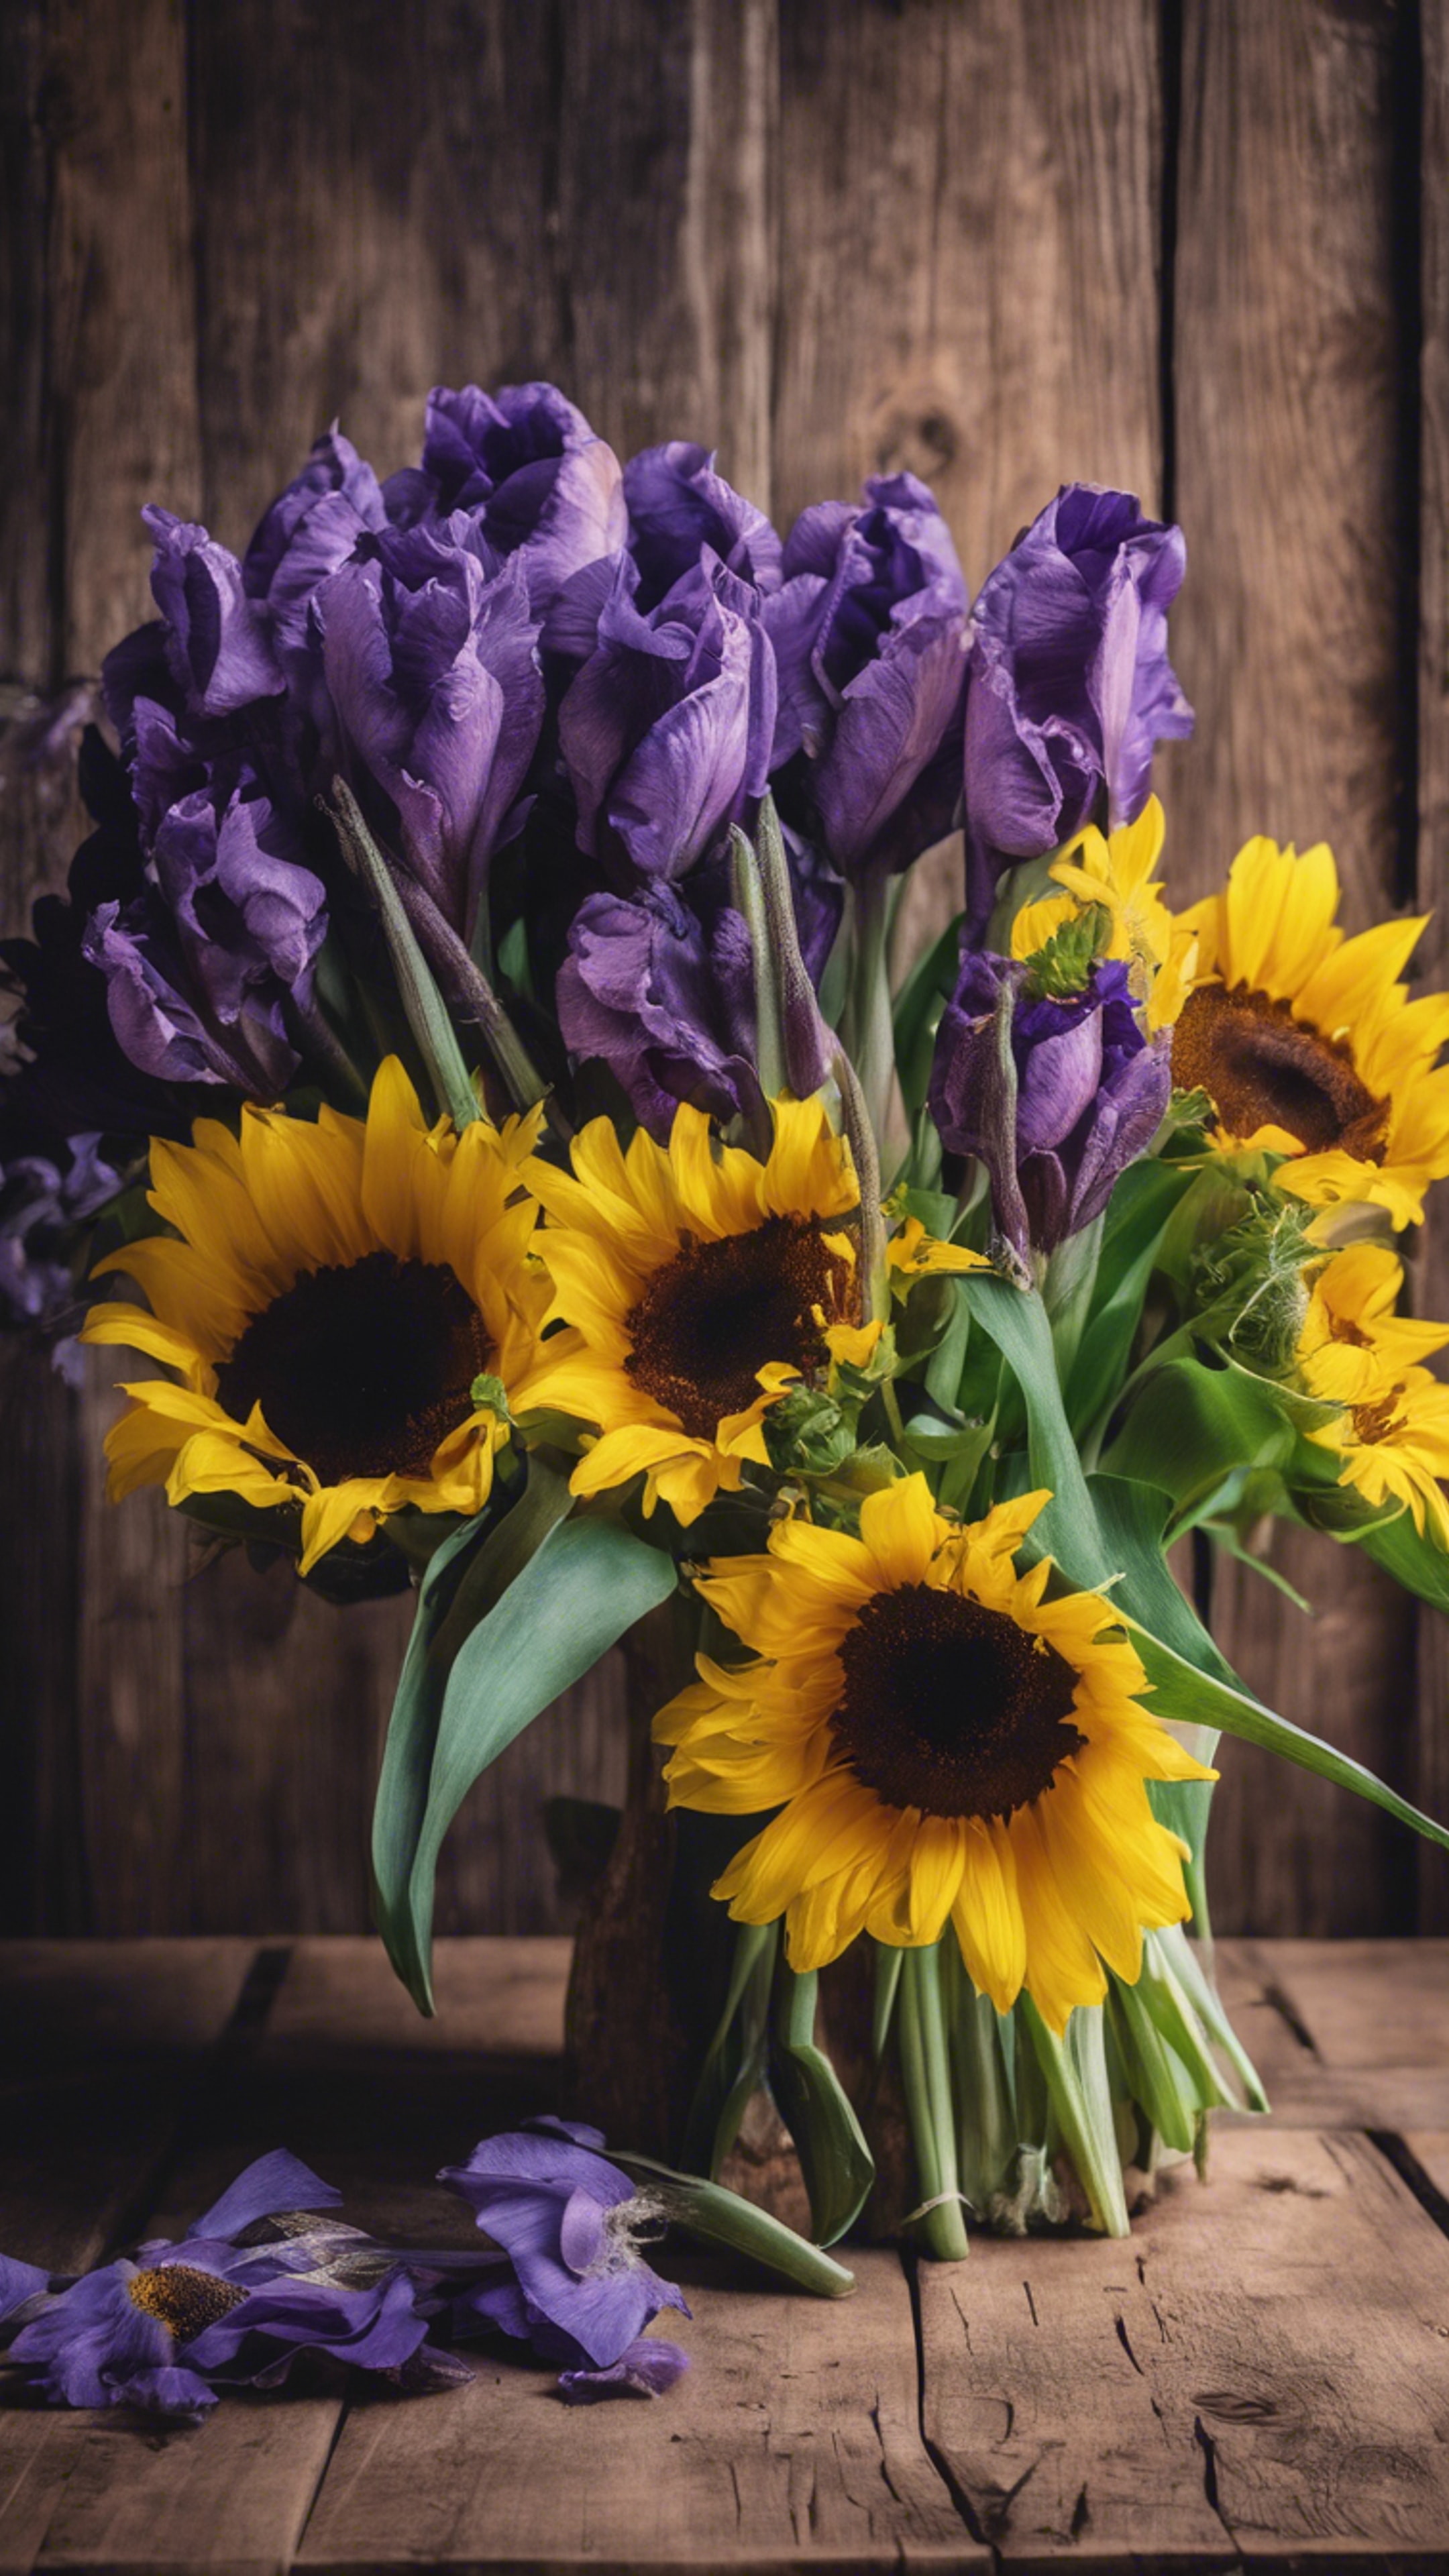 A bouquet of violet irises and bright yellow sunflowers sitting on a rustic wooden table. Wallpaper[036542cc0bff4a9eafa2]